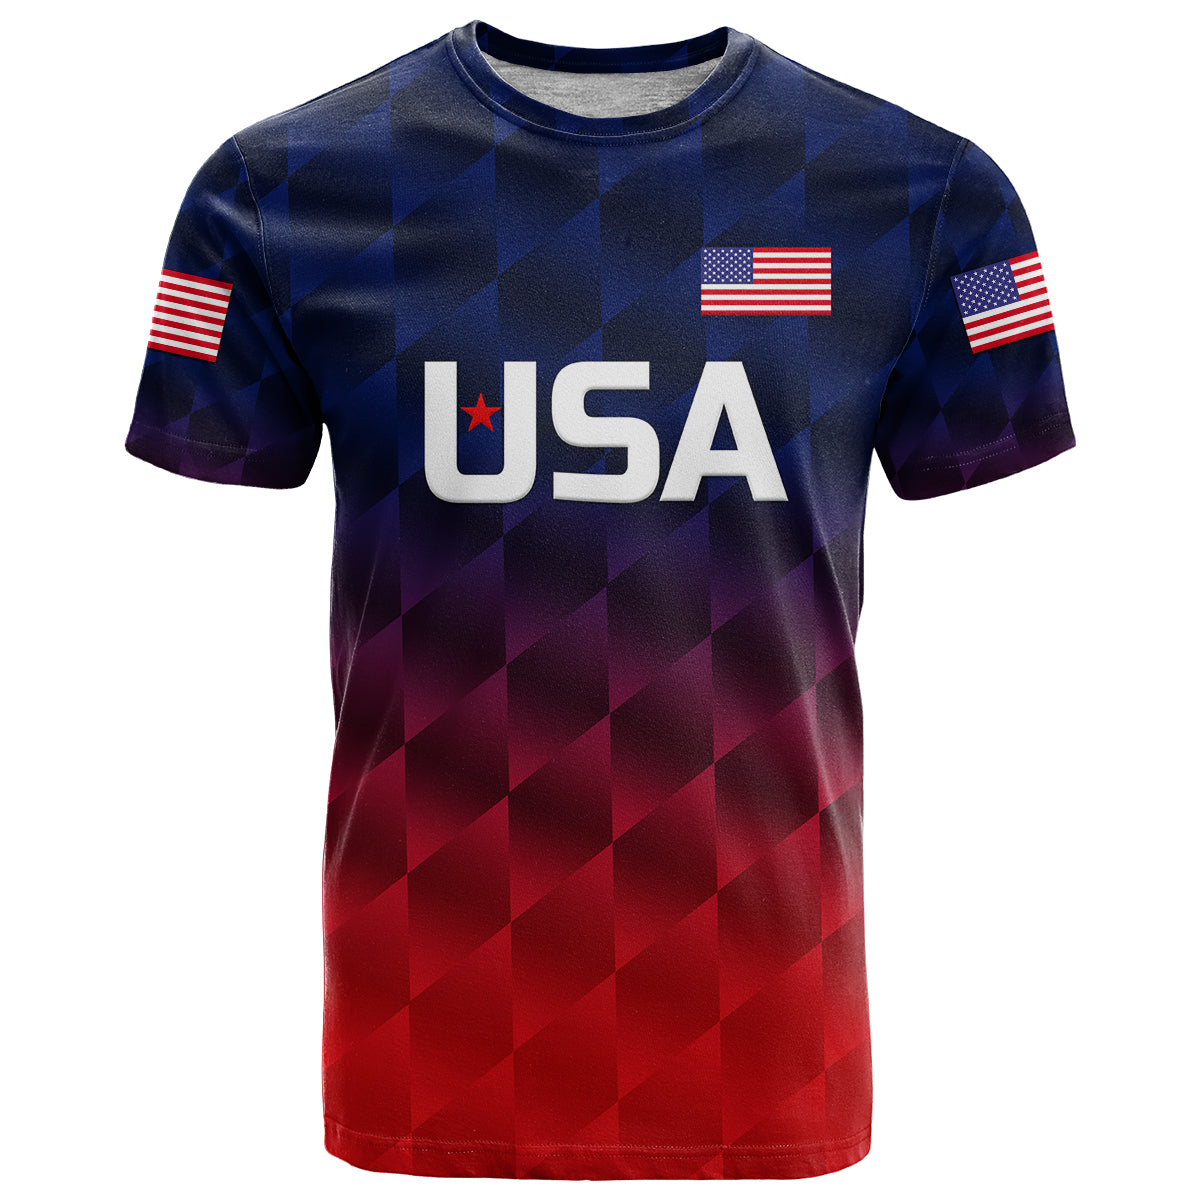 custom-personalised-united-states-national-cricket-t-shirt-team-usa-cricket-gradient-navy-red